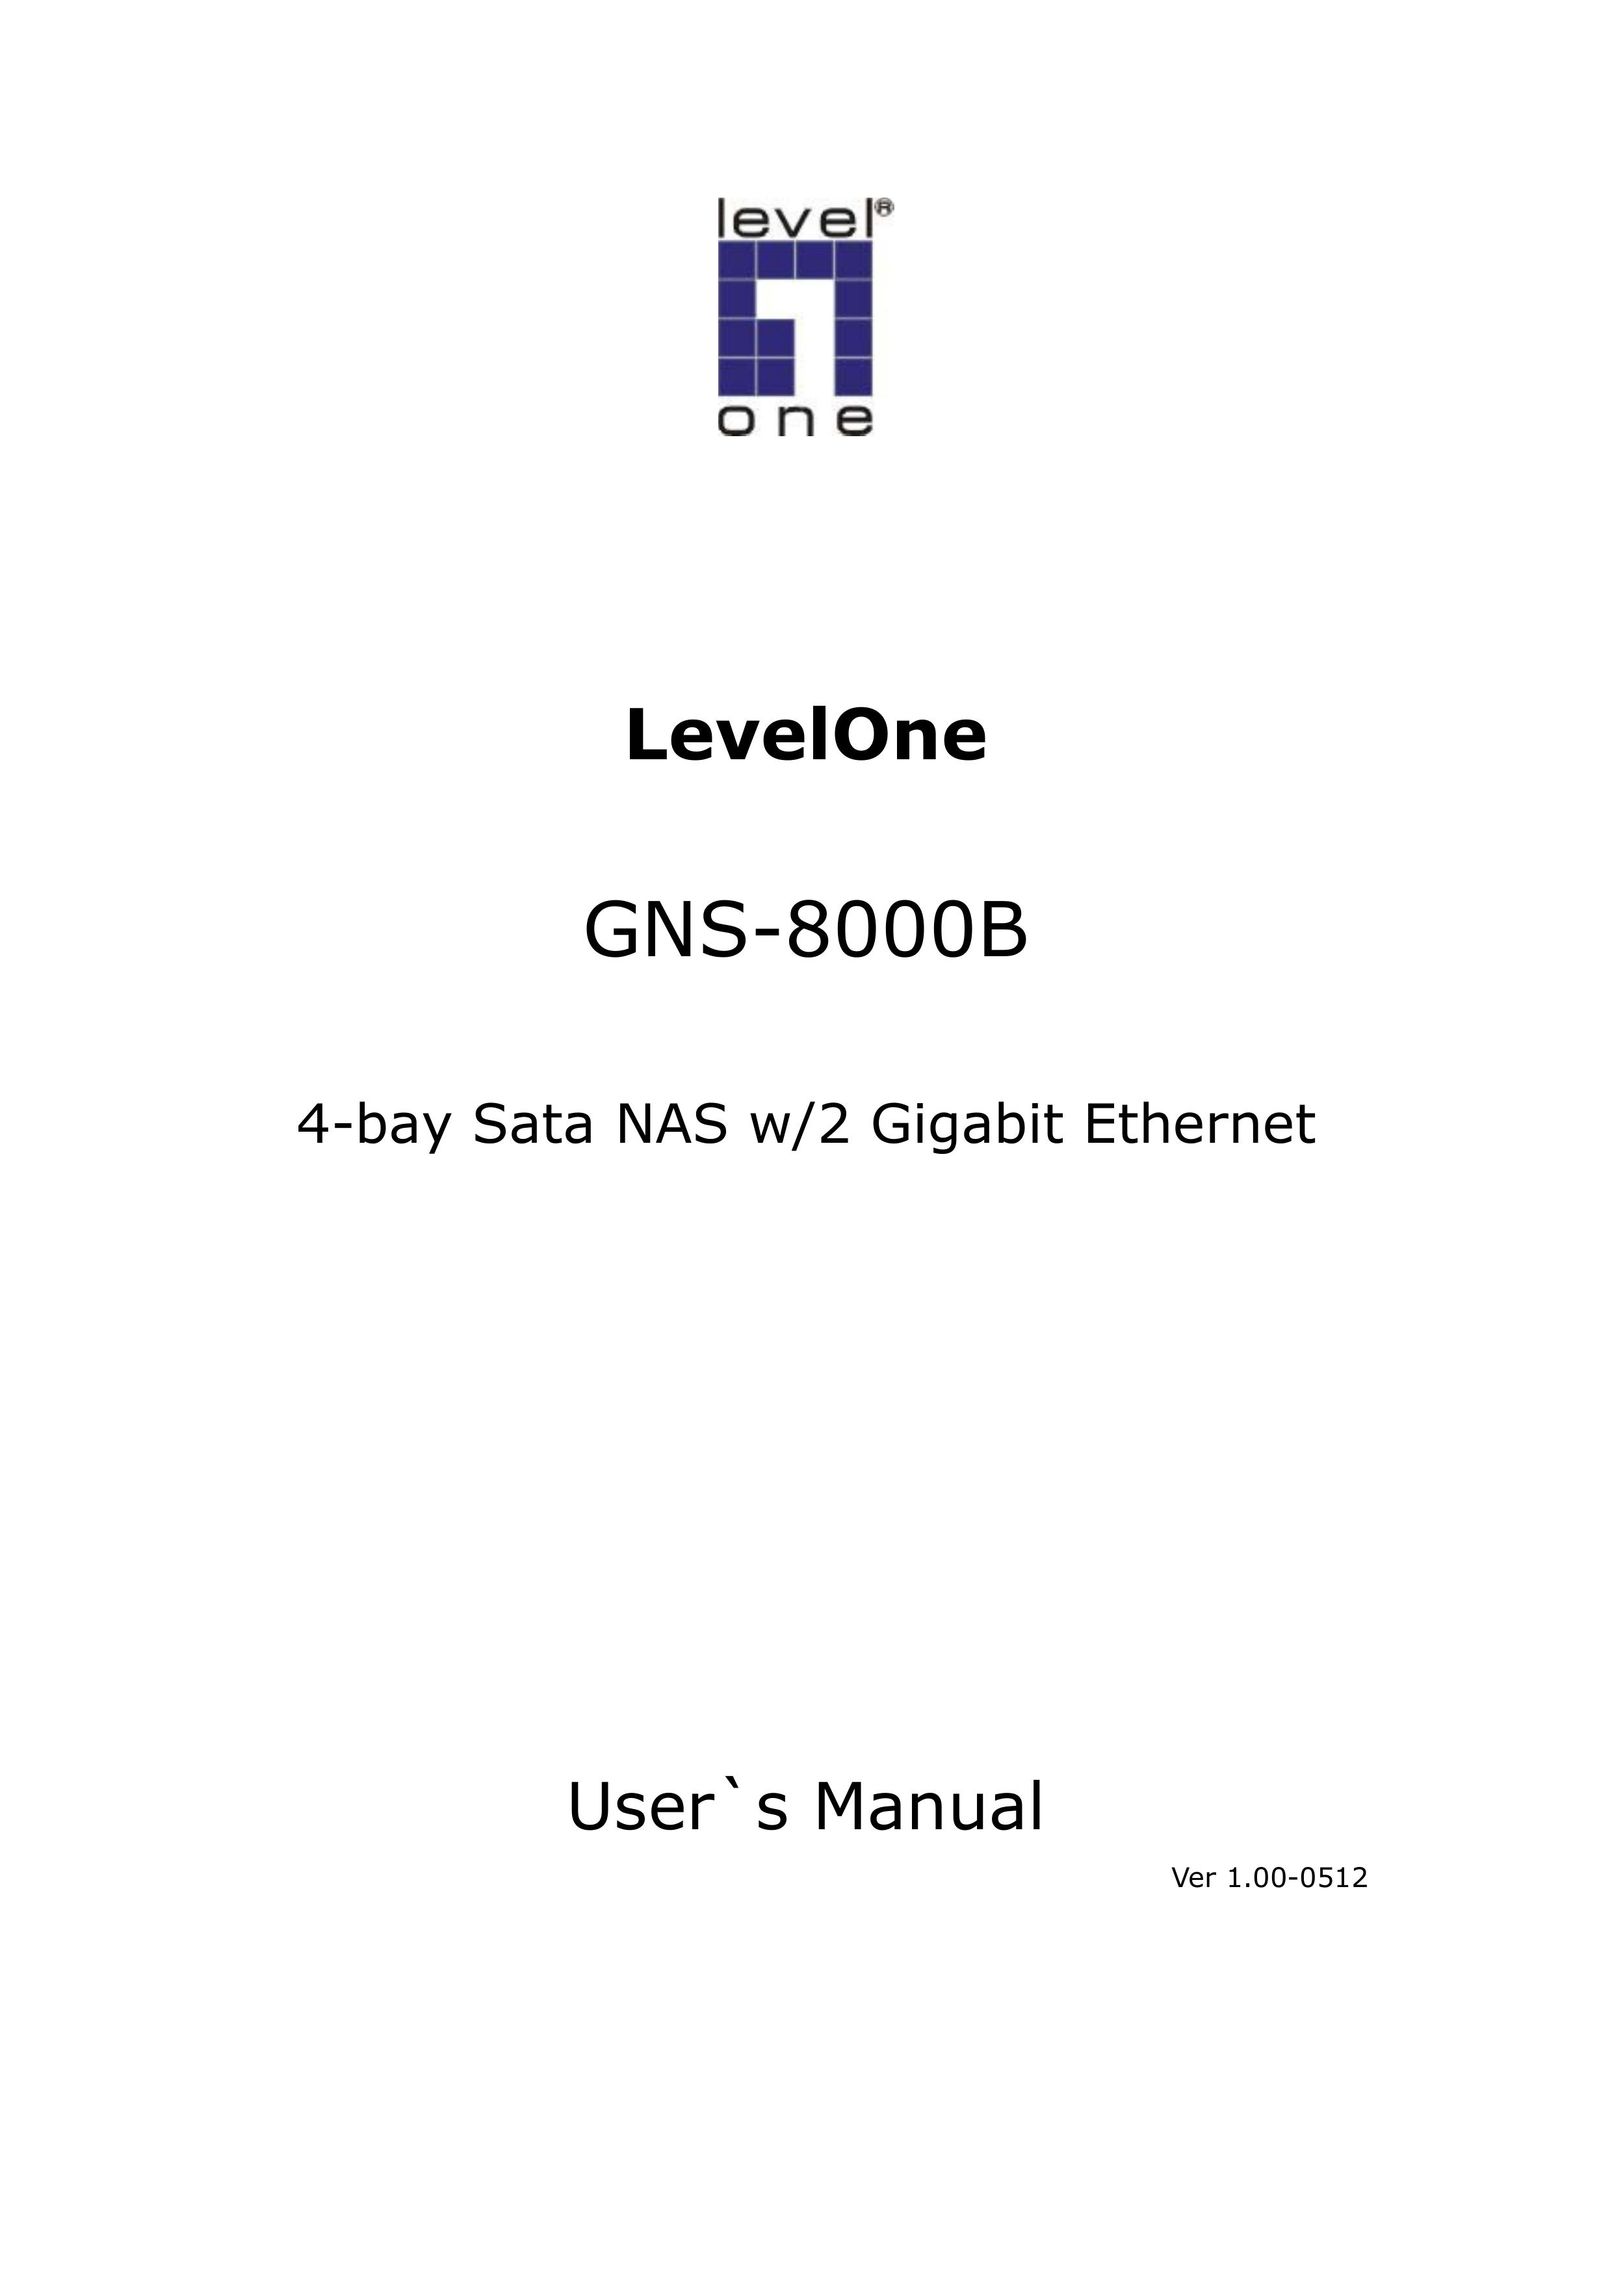 LevelOne GNS-8000B Network Card User Manual